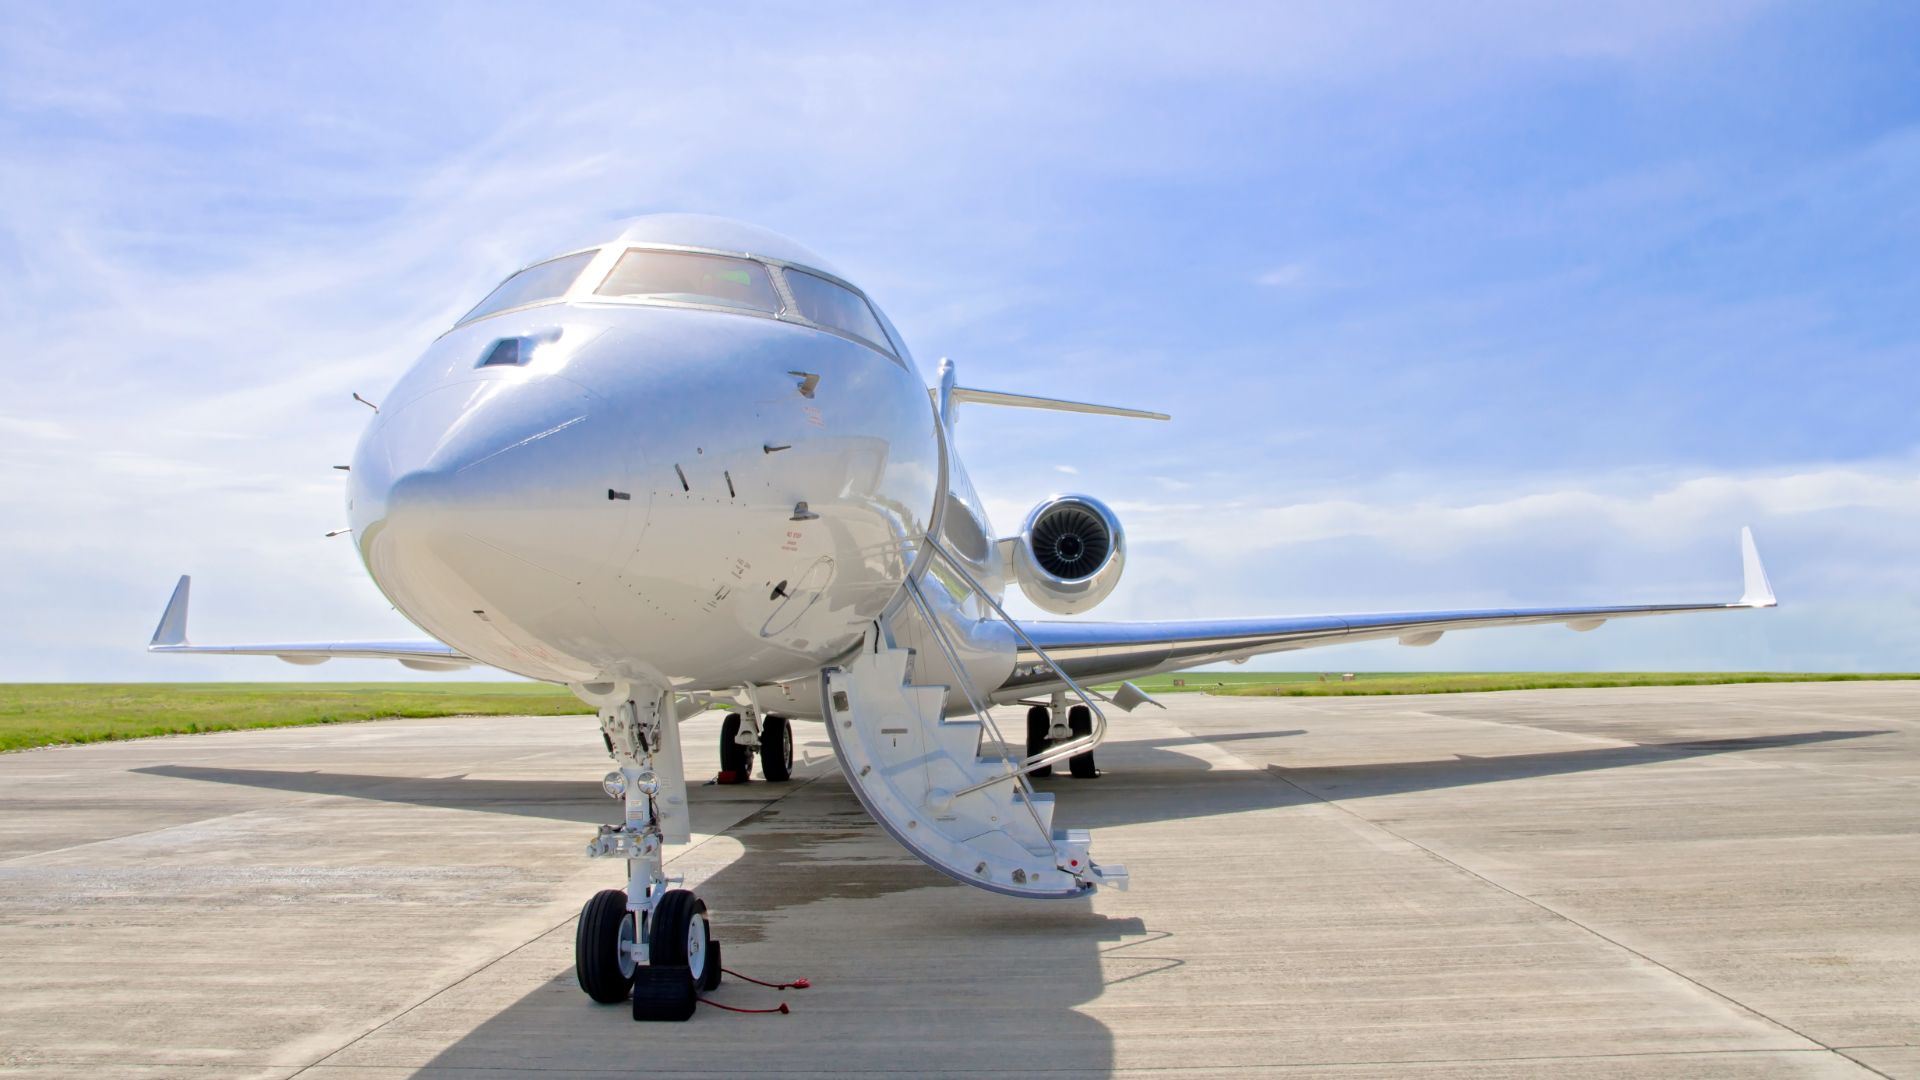 Top 7 Ultra-Long-Range Jets for Unparalleled Comfort and Luxury in High-Altitude Travel